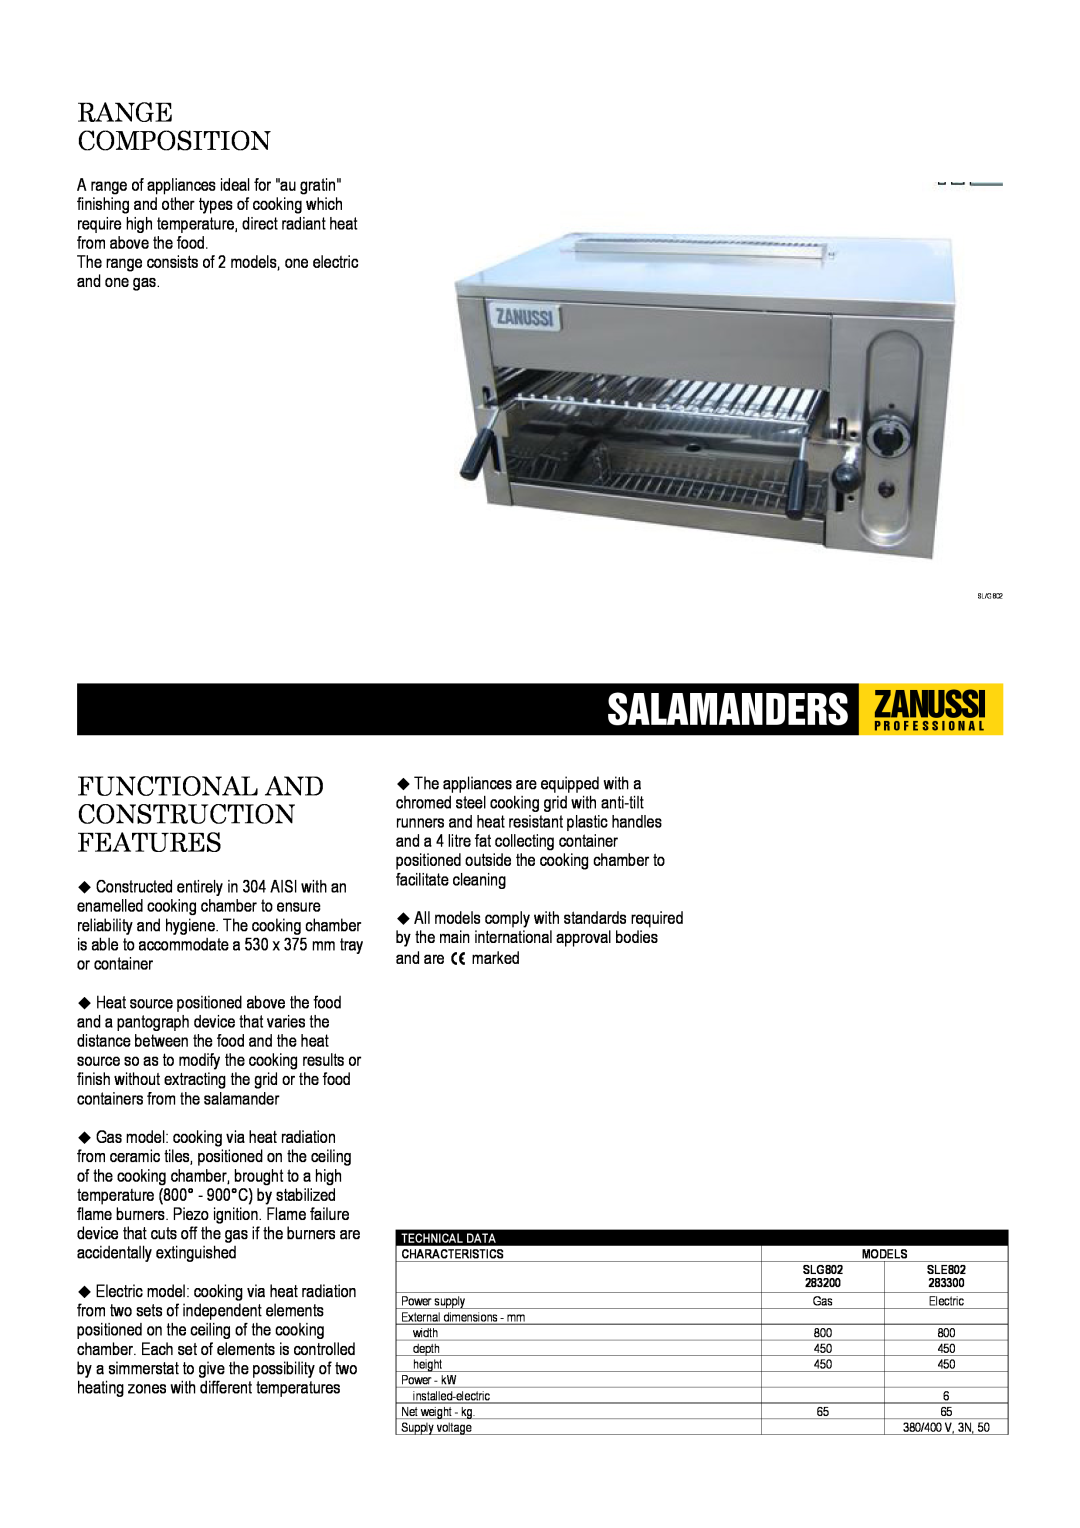 Zanussi 283300, 283200, SLG802, SLE802 dimensions Range Composition, Functional And Construction Features, Technical Data 